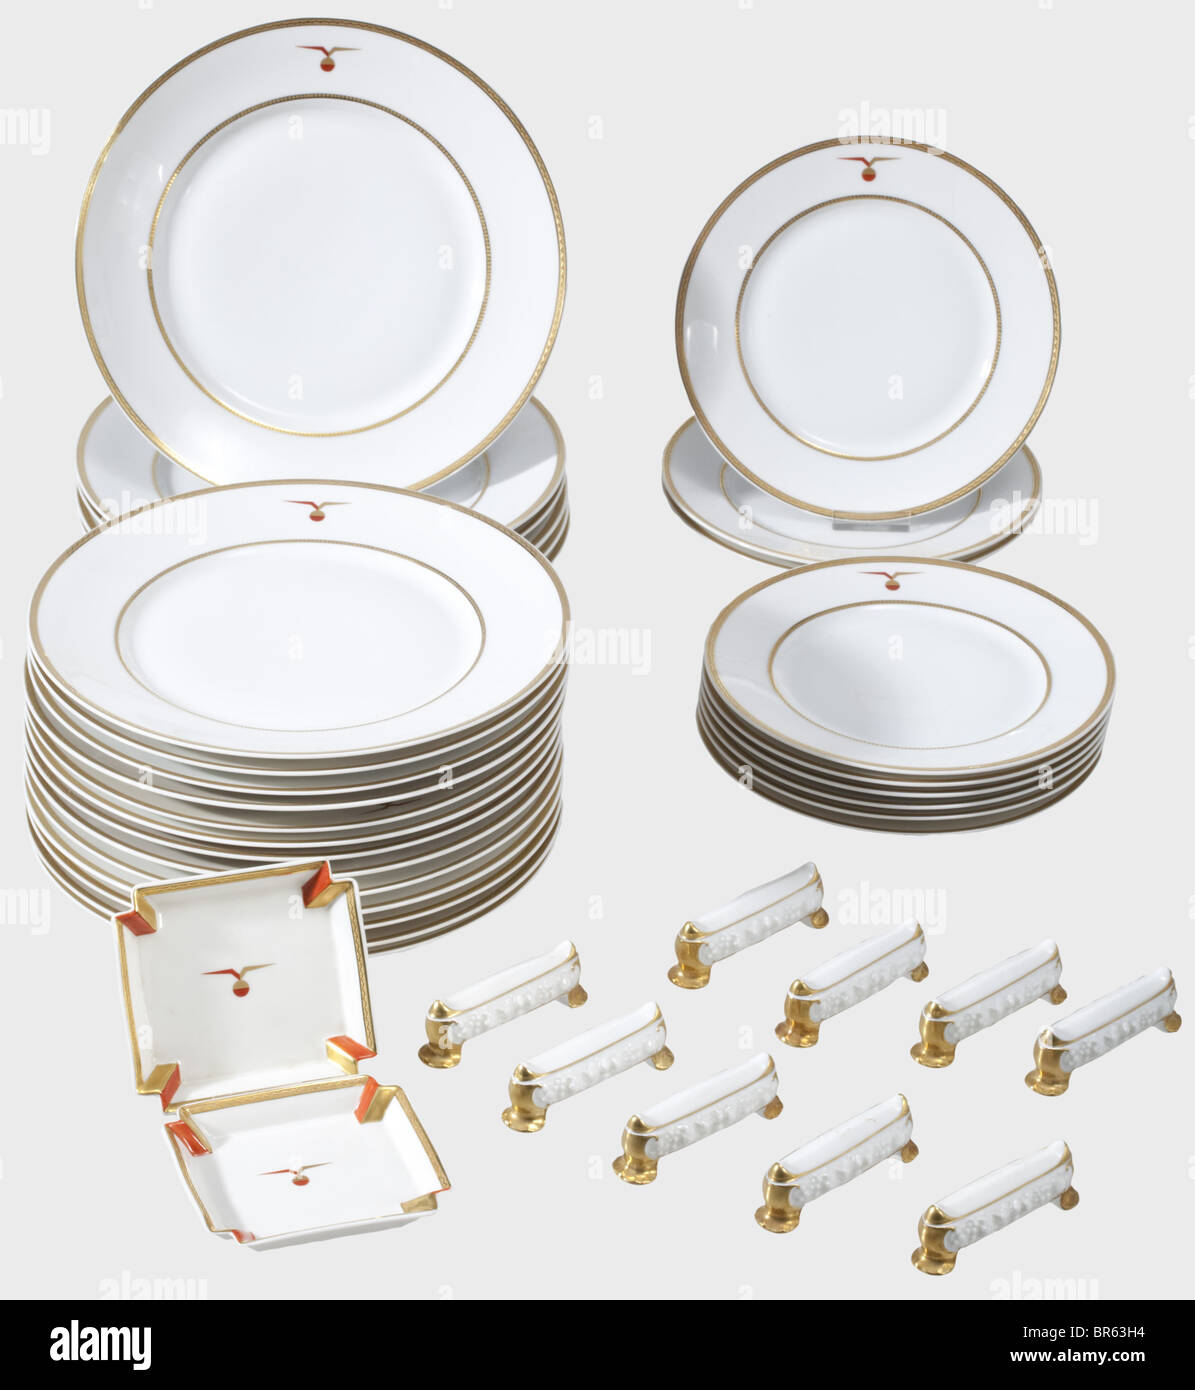 38 porcelain pieces from the service aboard of the Dornier DO X 1929., White, glazed porcelain with decorative lines as well as a stylised, winged globe in gold and red. On the bottom manufacturer's mark in underglaze green 'Gräf & Krippner Selb Bavaria' as well as the golden silhouette of the hydroplane over 'DO X 1929' and most of them inscribed 'Decoration by Marcel Dornier Langenargen'. Consisting of: 19 dining plates, diameter 25.4 cm. Nine dessert plates, diameter 20.3 cm. Two ashtrays, 10.4 x 11.4 cm. Also nine knife rests, with only golden manufactory m, Stock Photo